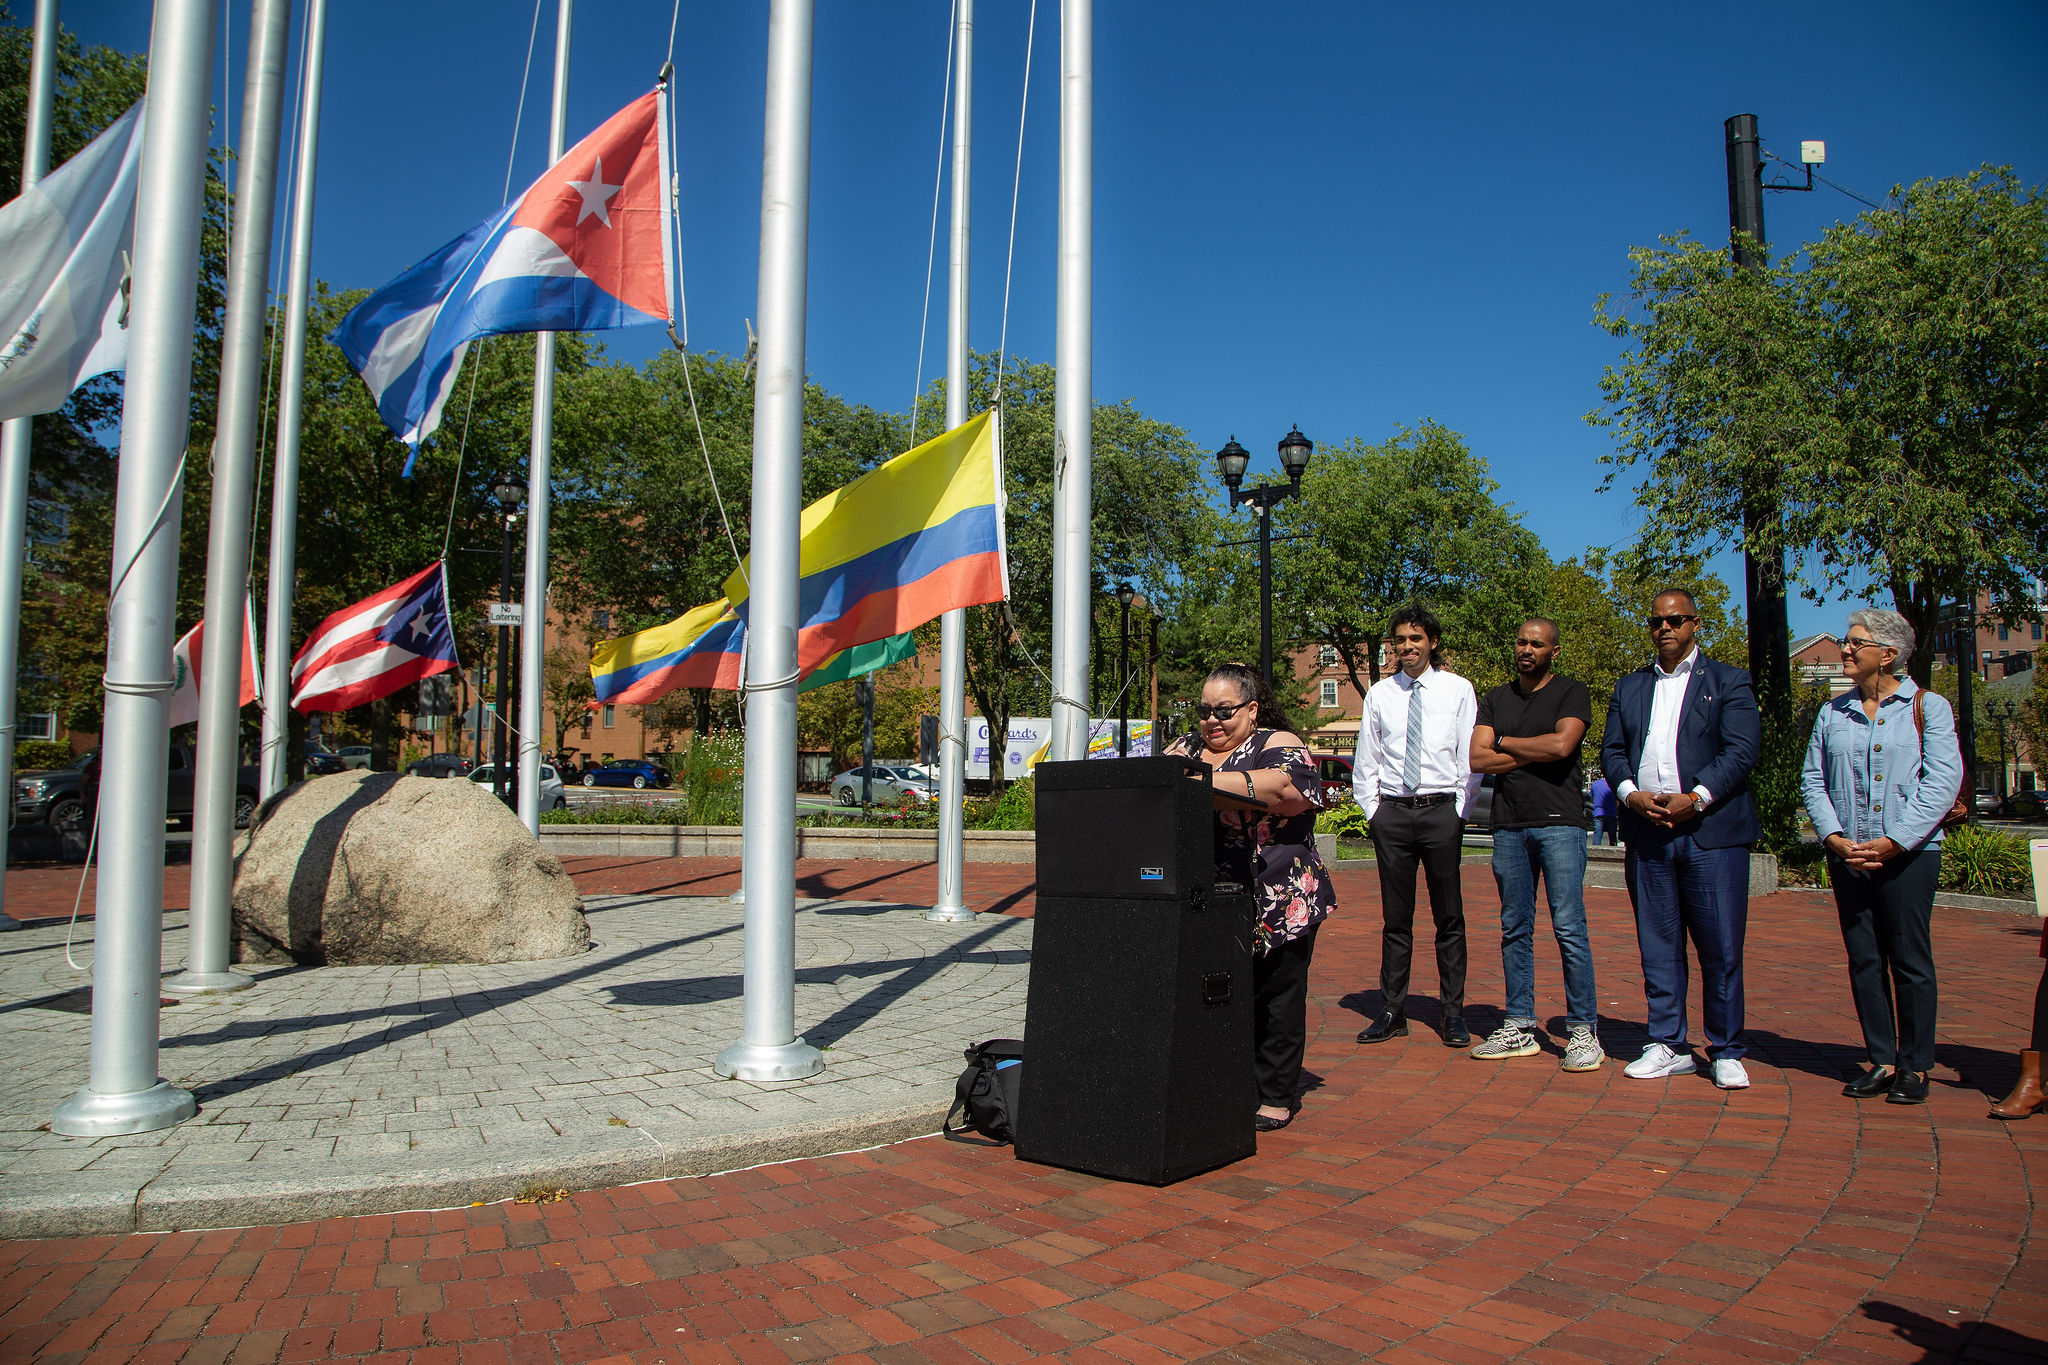 A woman stands behind the podium to speak during the Latinx heritage month flag raising